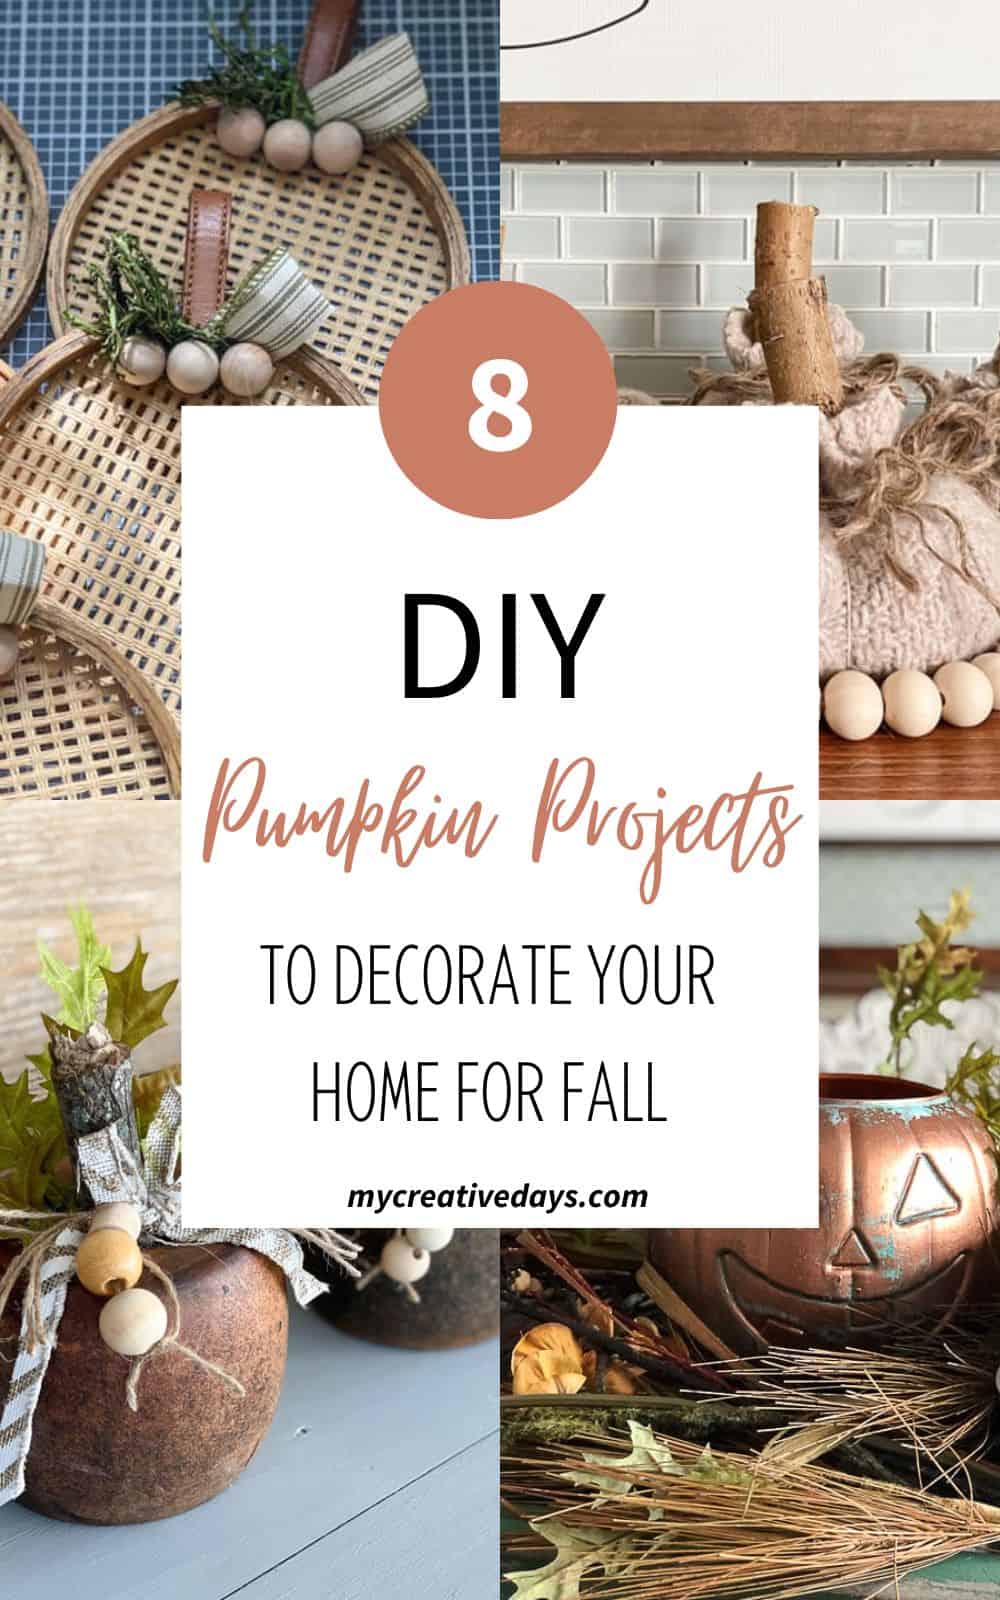 Are you looking for ways to welcome the fall season into your home? These 8 DIY Pumpkin Projects will add the perfect fall touch to your home.